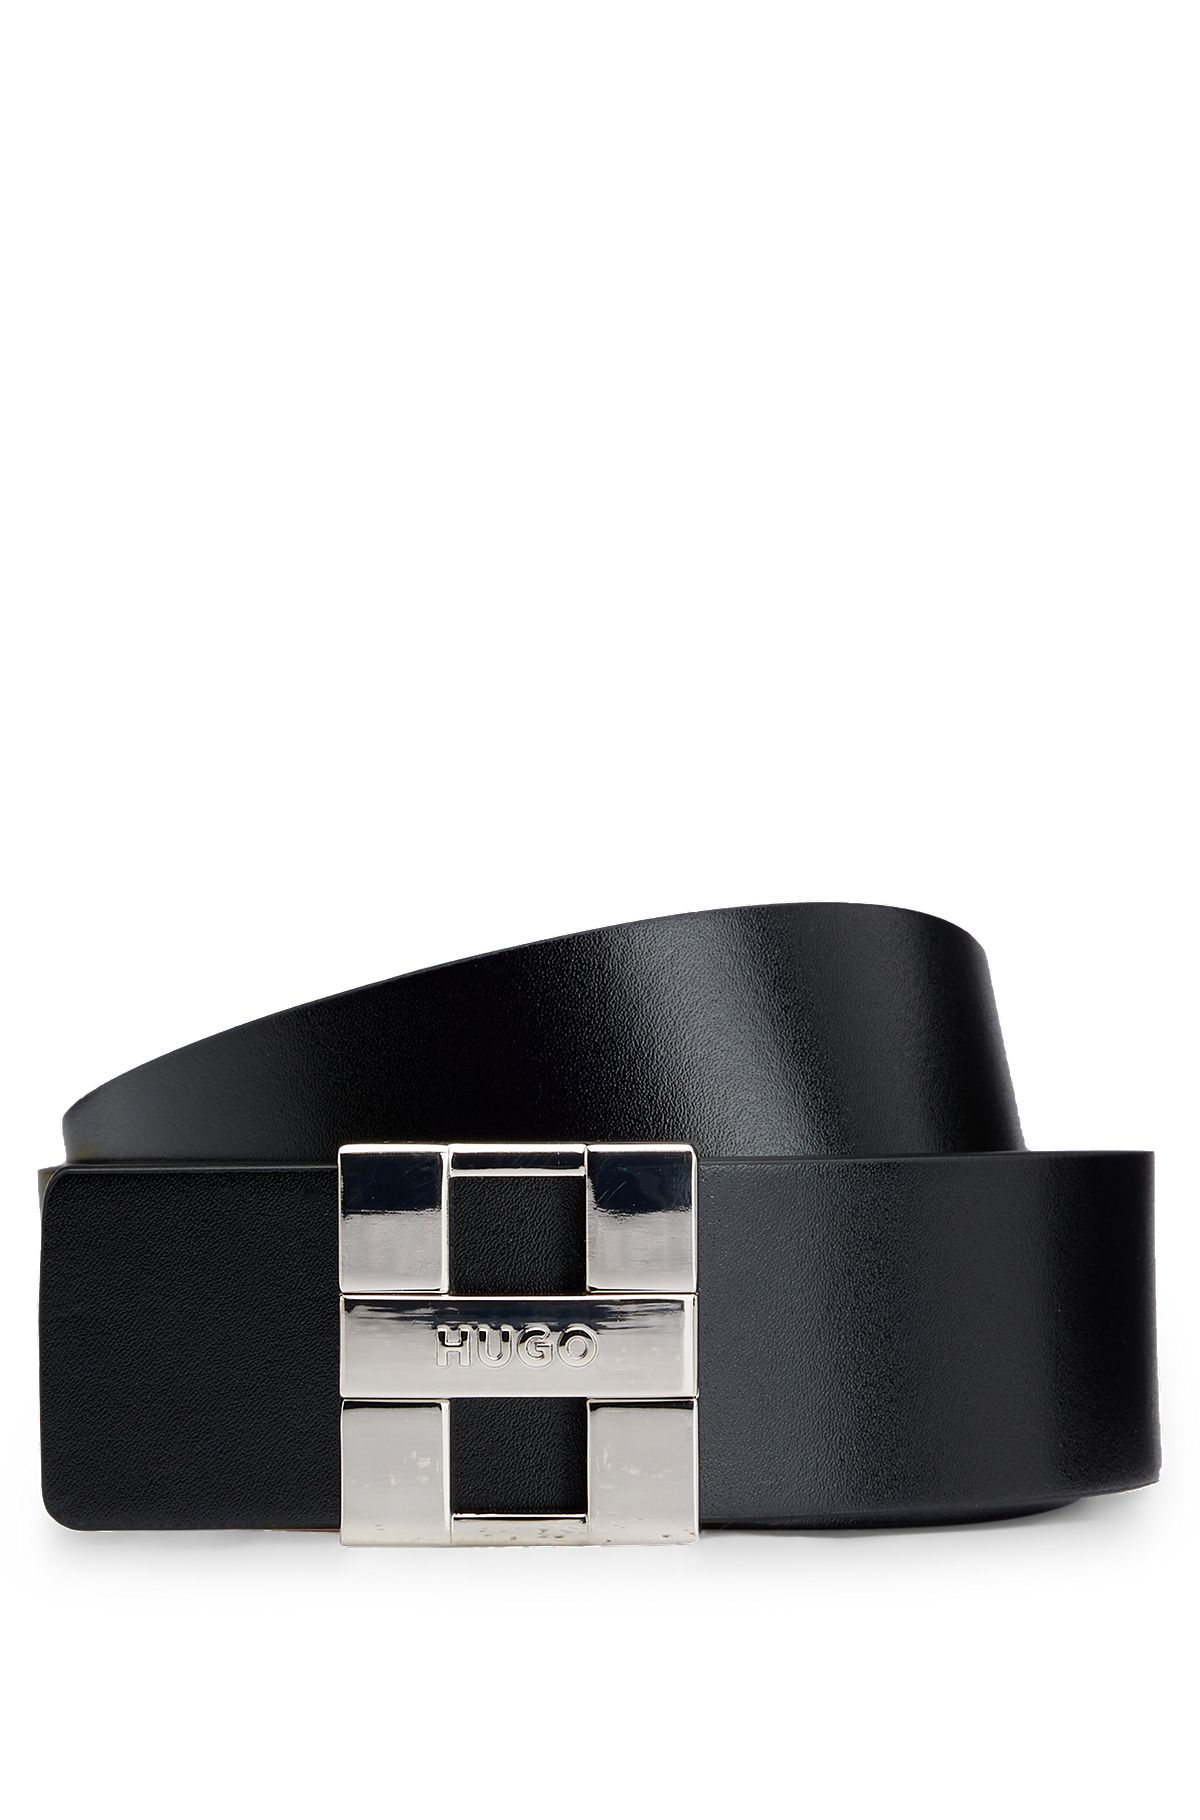 Reversible belt in Italian leather with branded plaque buckle, Black